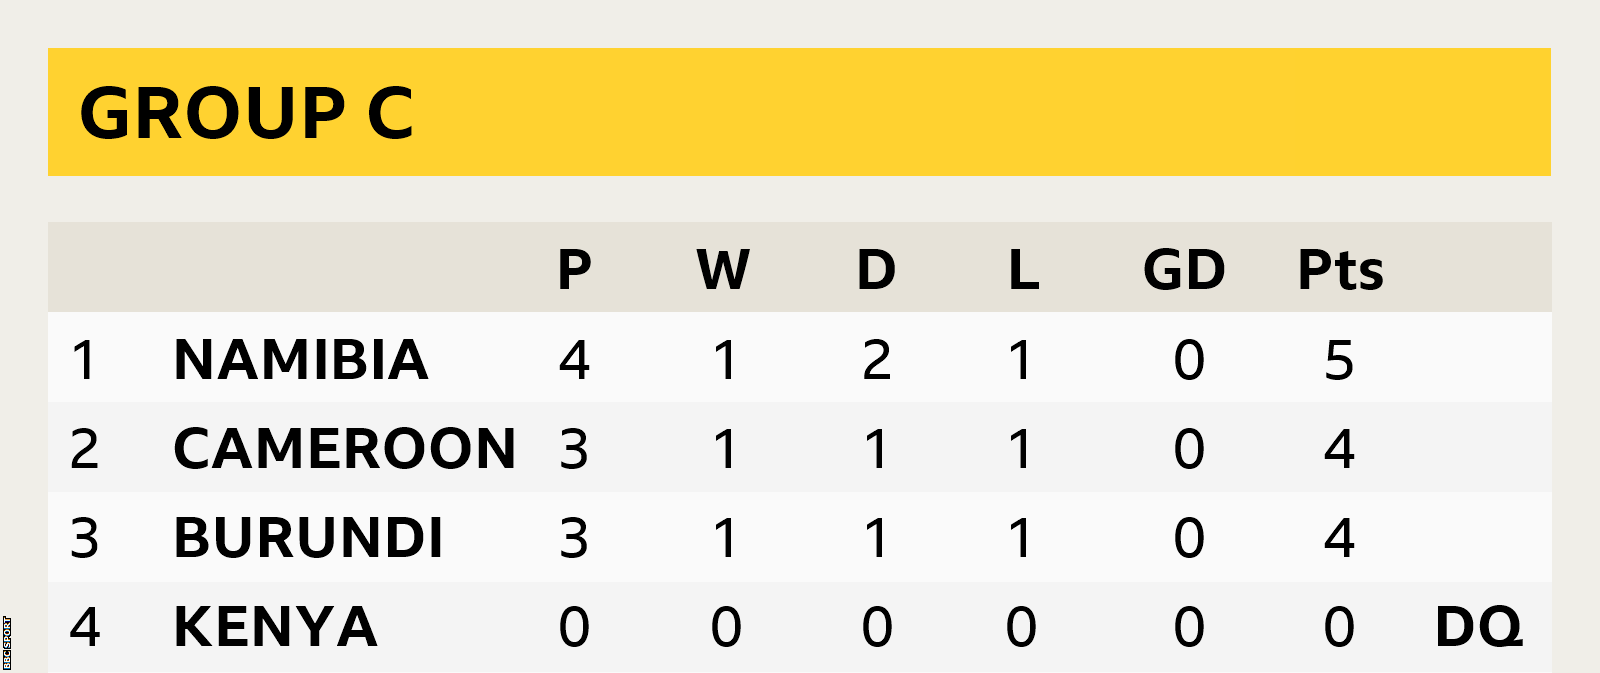 Group C table for the Afcon 2023 qualifiers